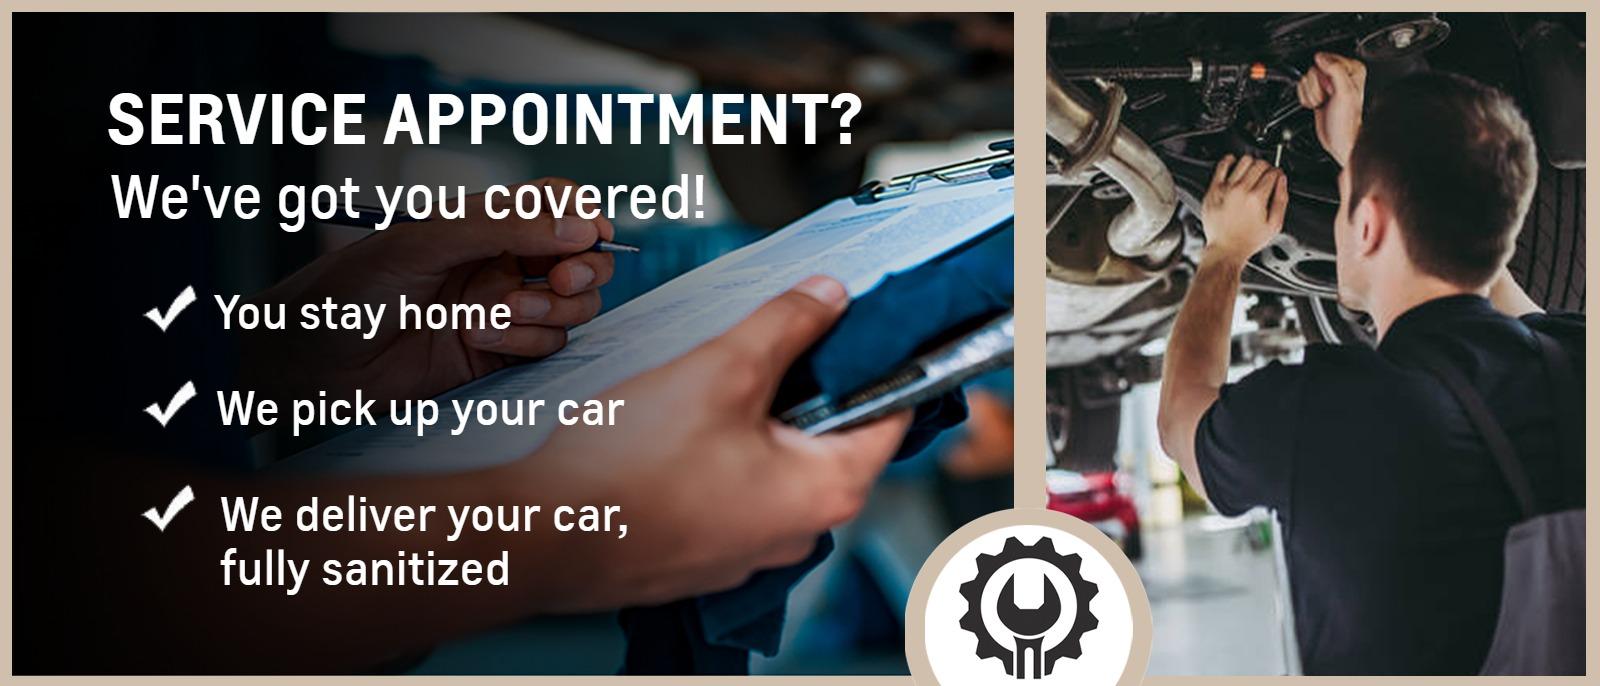 Service Appointment? We've got you covered! You Stay home, We pick up your car, We deliver your car, fully sanitized.